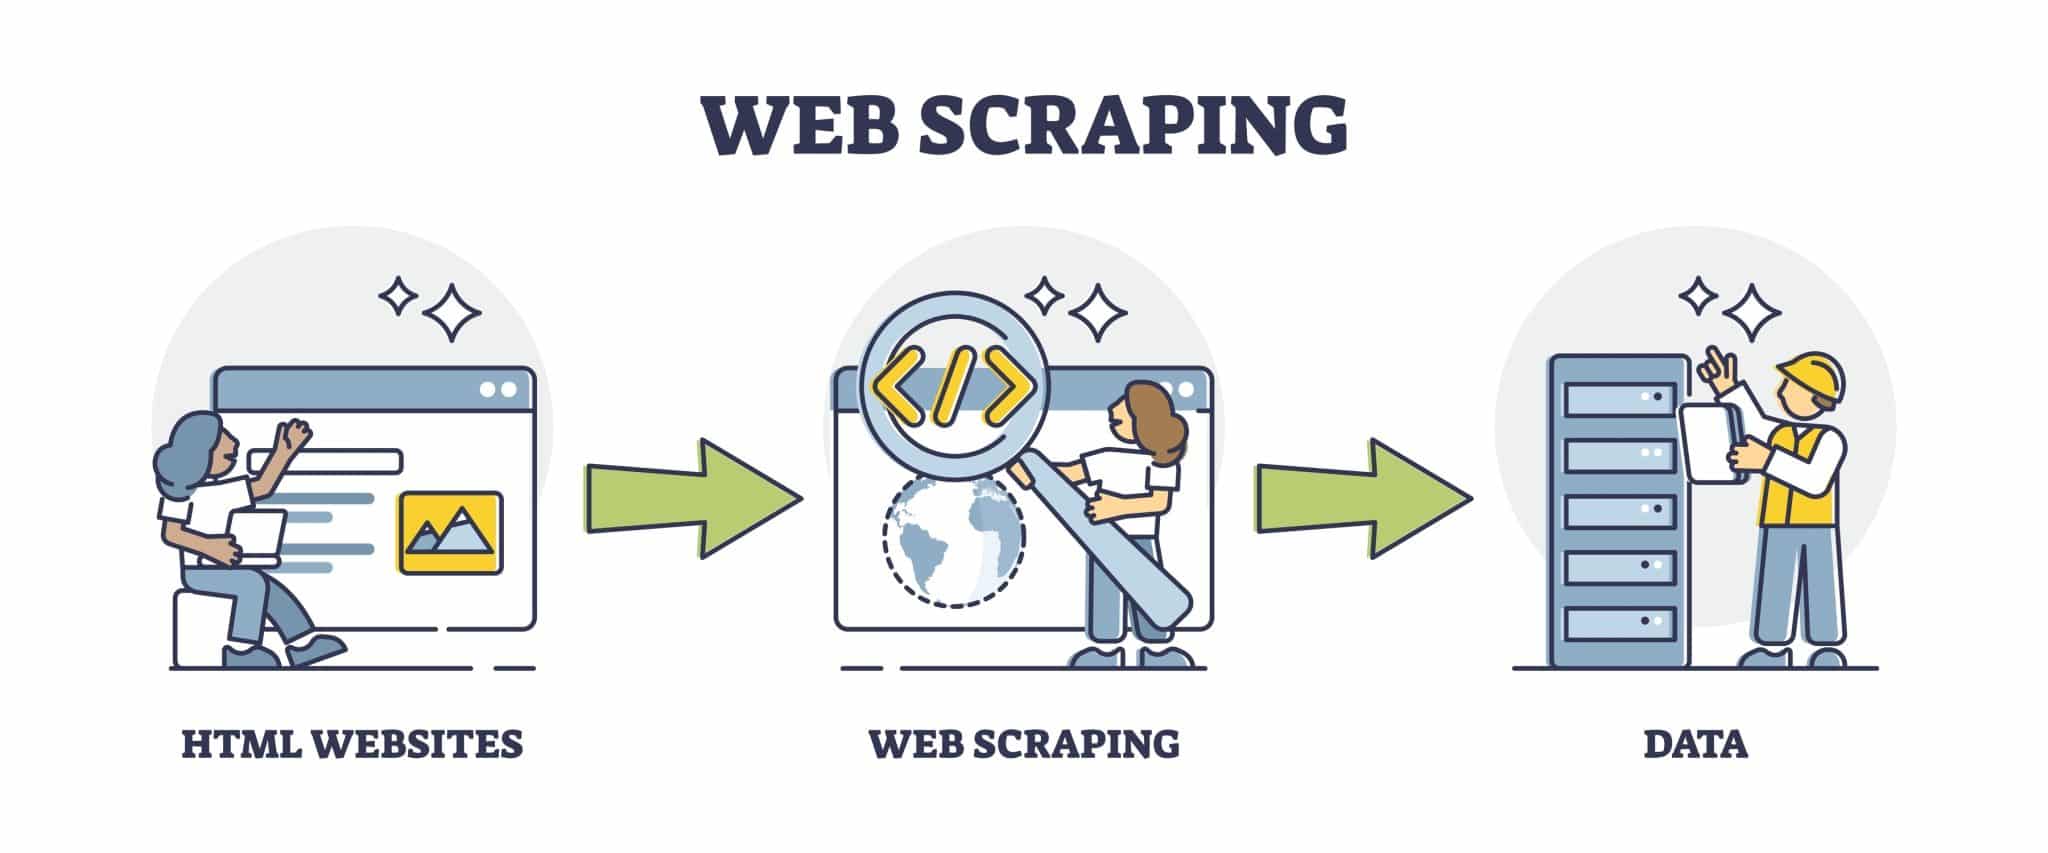 Why Web Scraping Is Important for Your Business